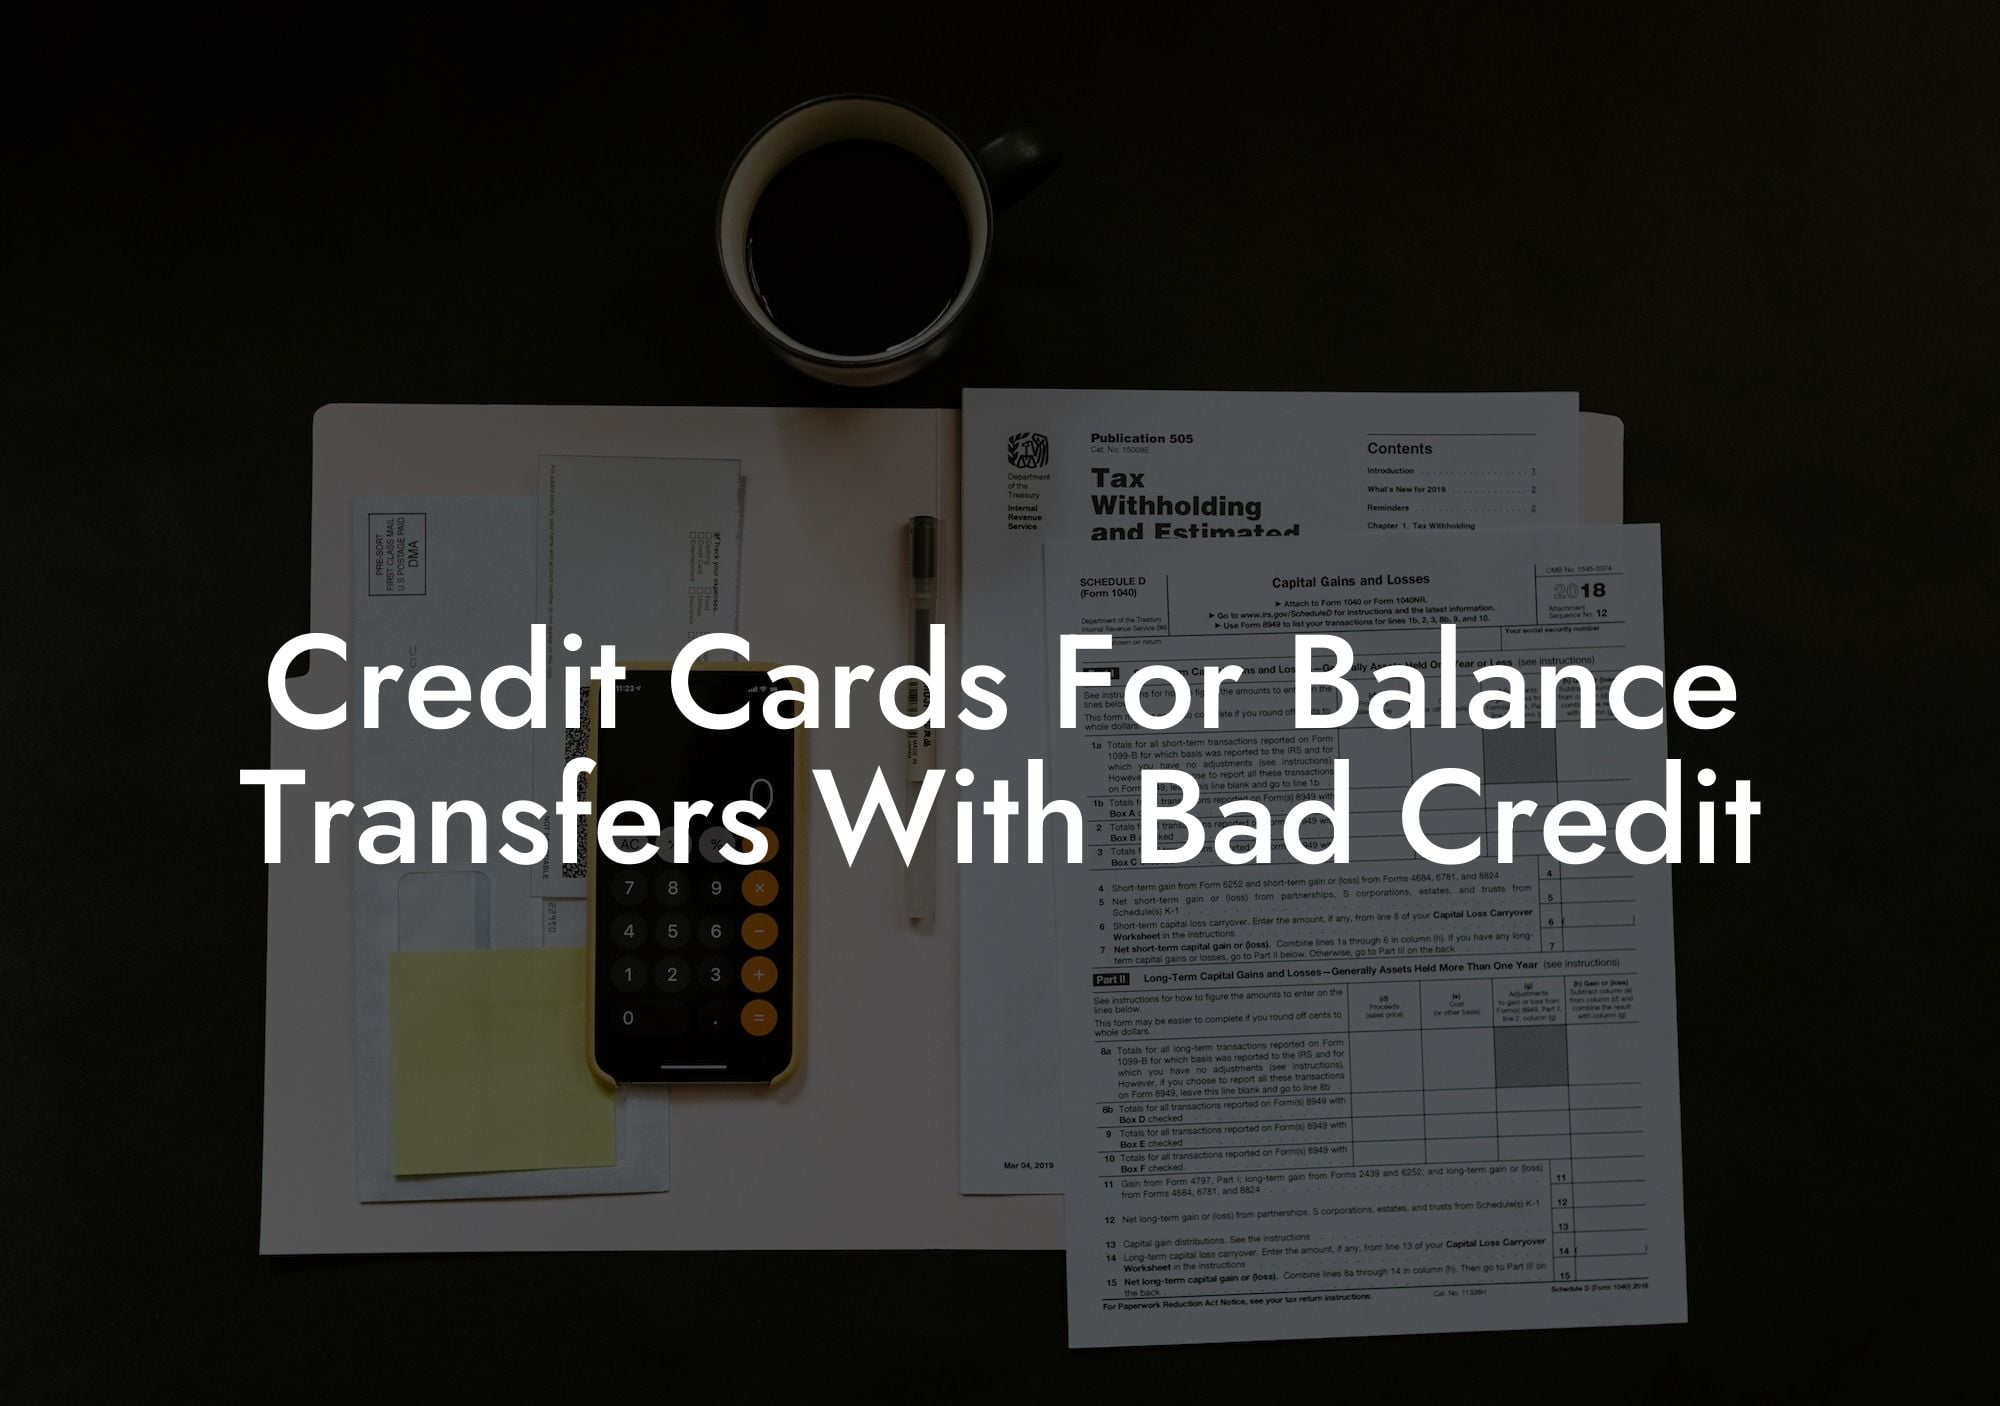 Credit Cards For Balance Transfers With Bad Credit